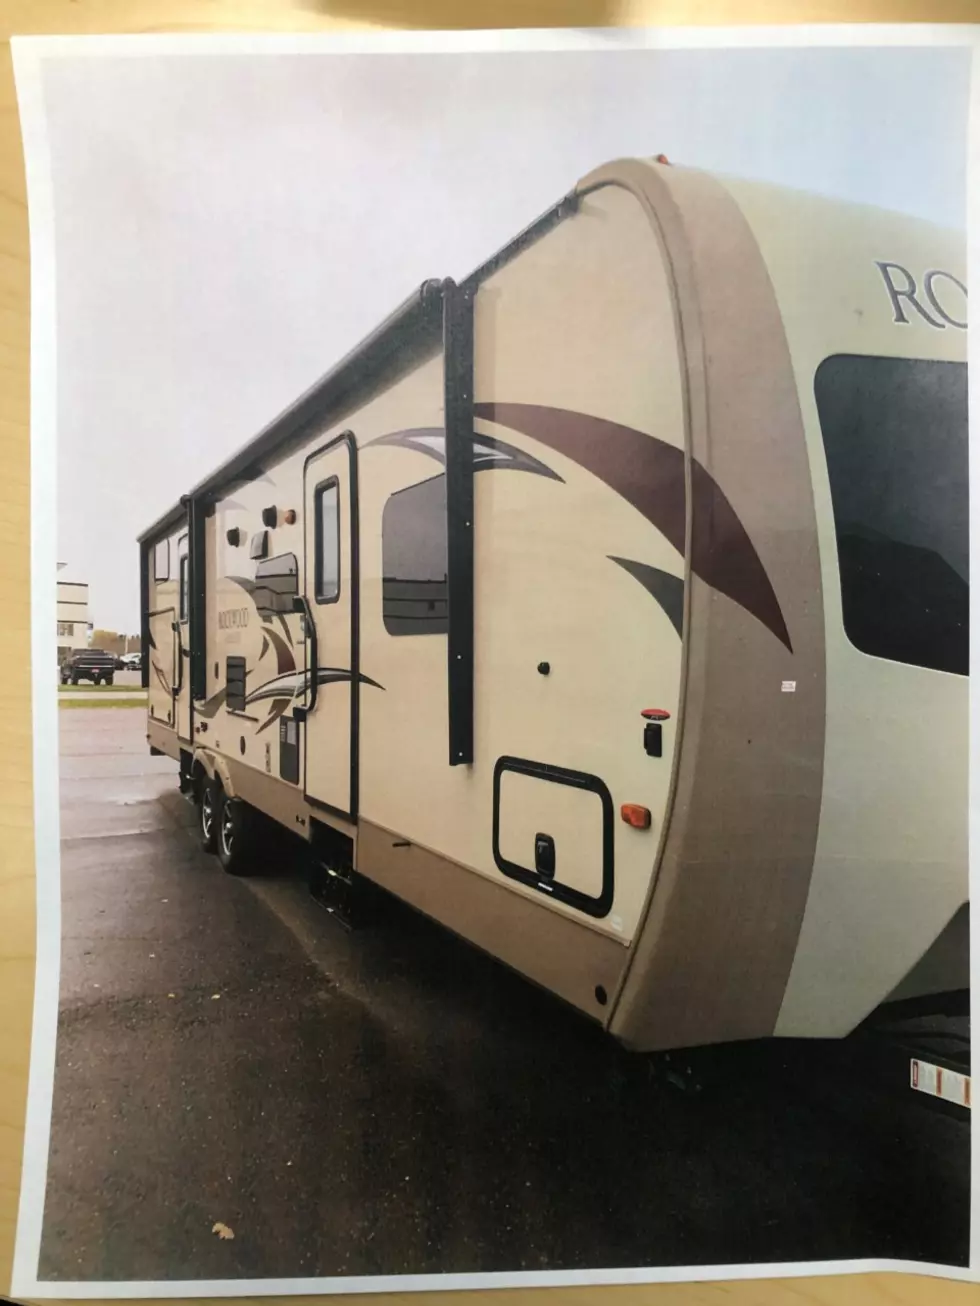 Stolen Camper Trailers Recovered, Two Suspects Jailed